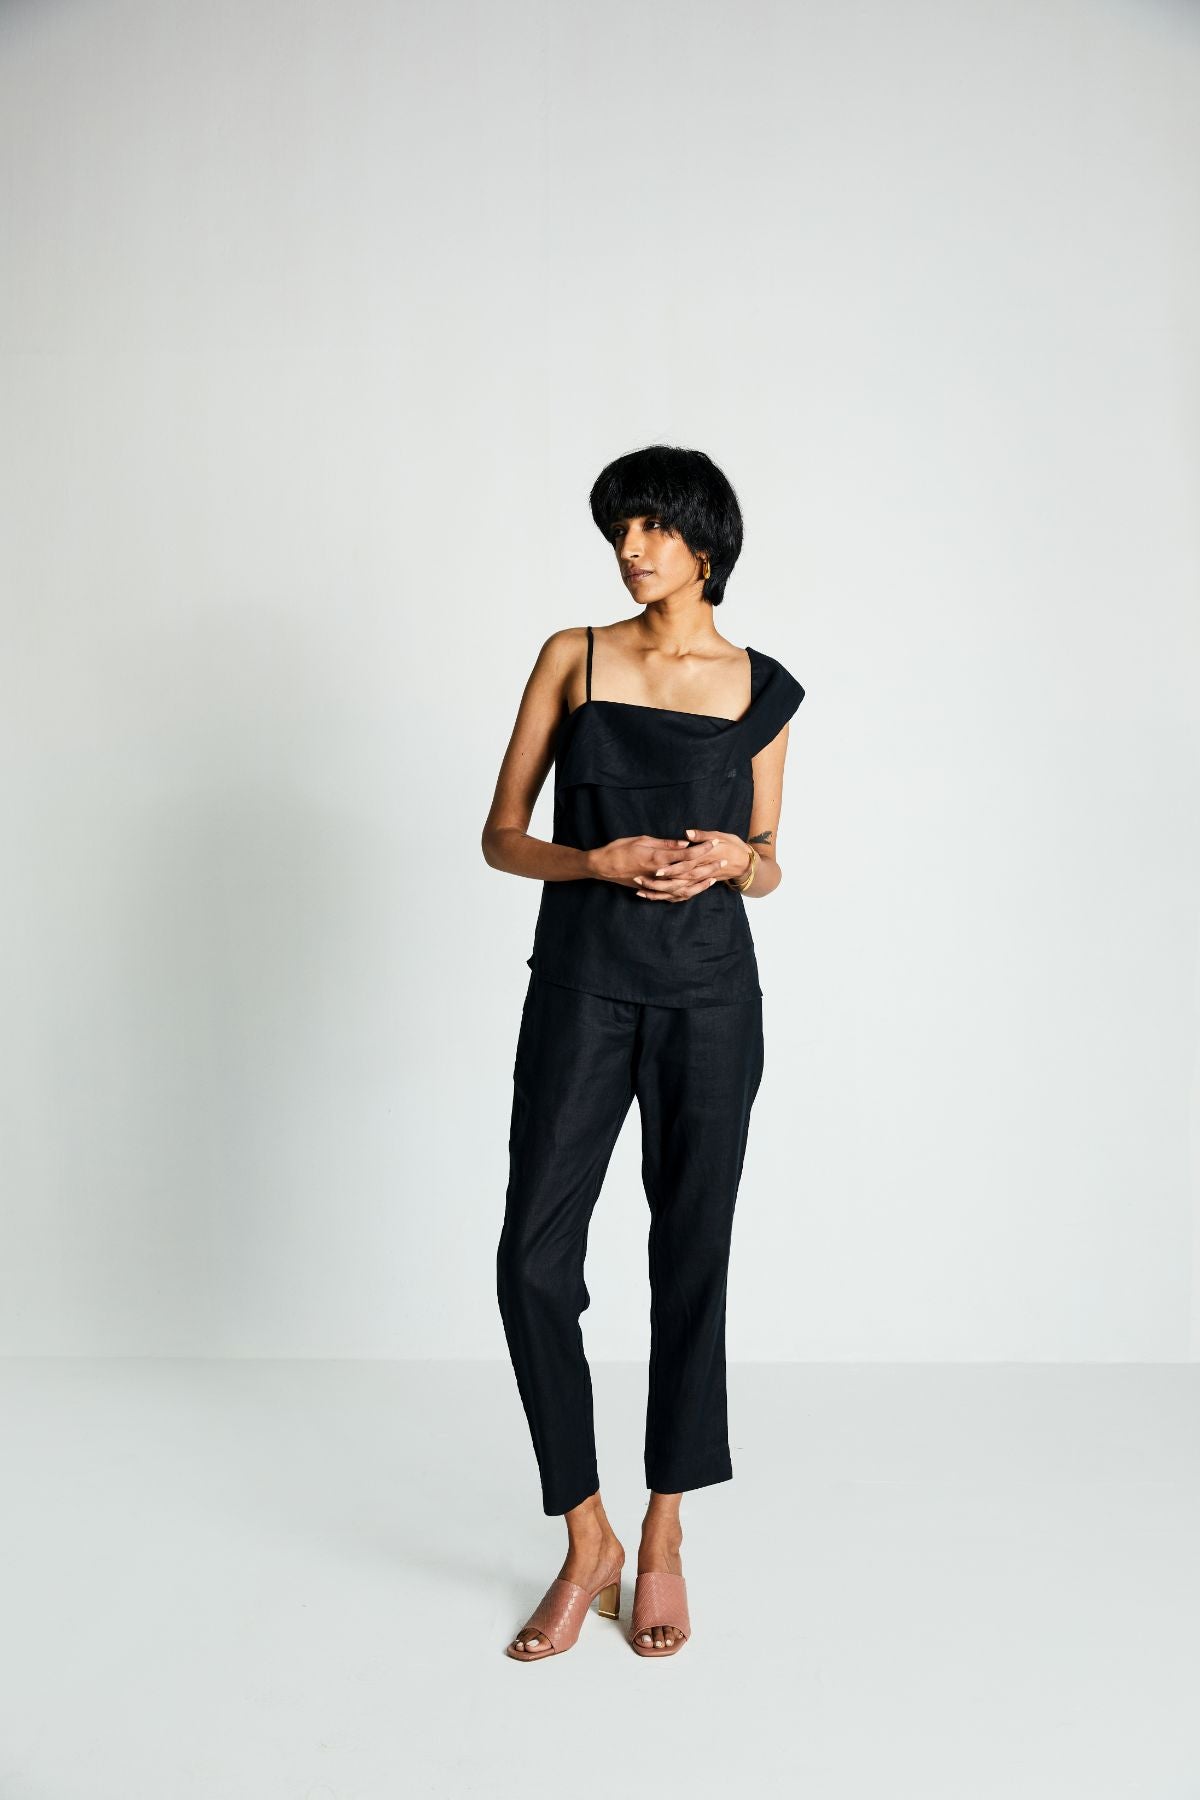 Black The Wandering Wave Top at Kamakhyaa by Reistor. This item is Black, Hemp, Less than $50, Natural, Noir, Office Wear, Regular Fit, Solid Selfmade, Solids, Spaghettis, Tops, Womenswear